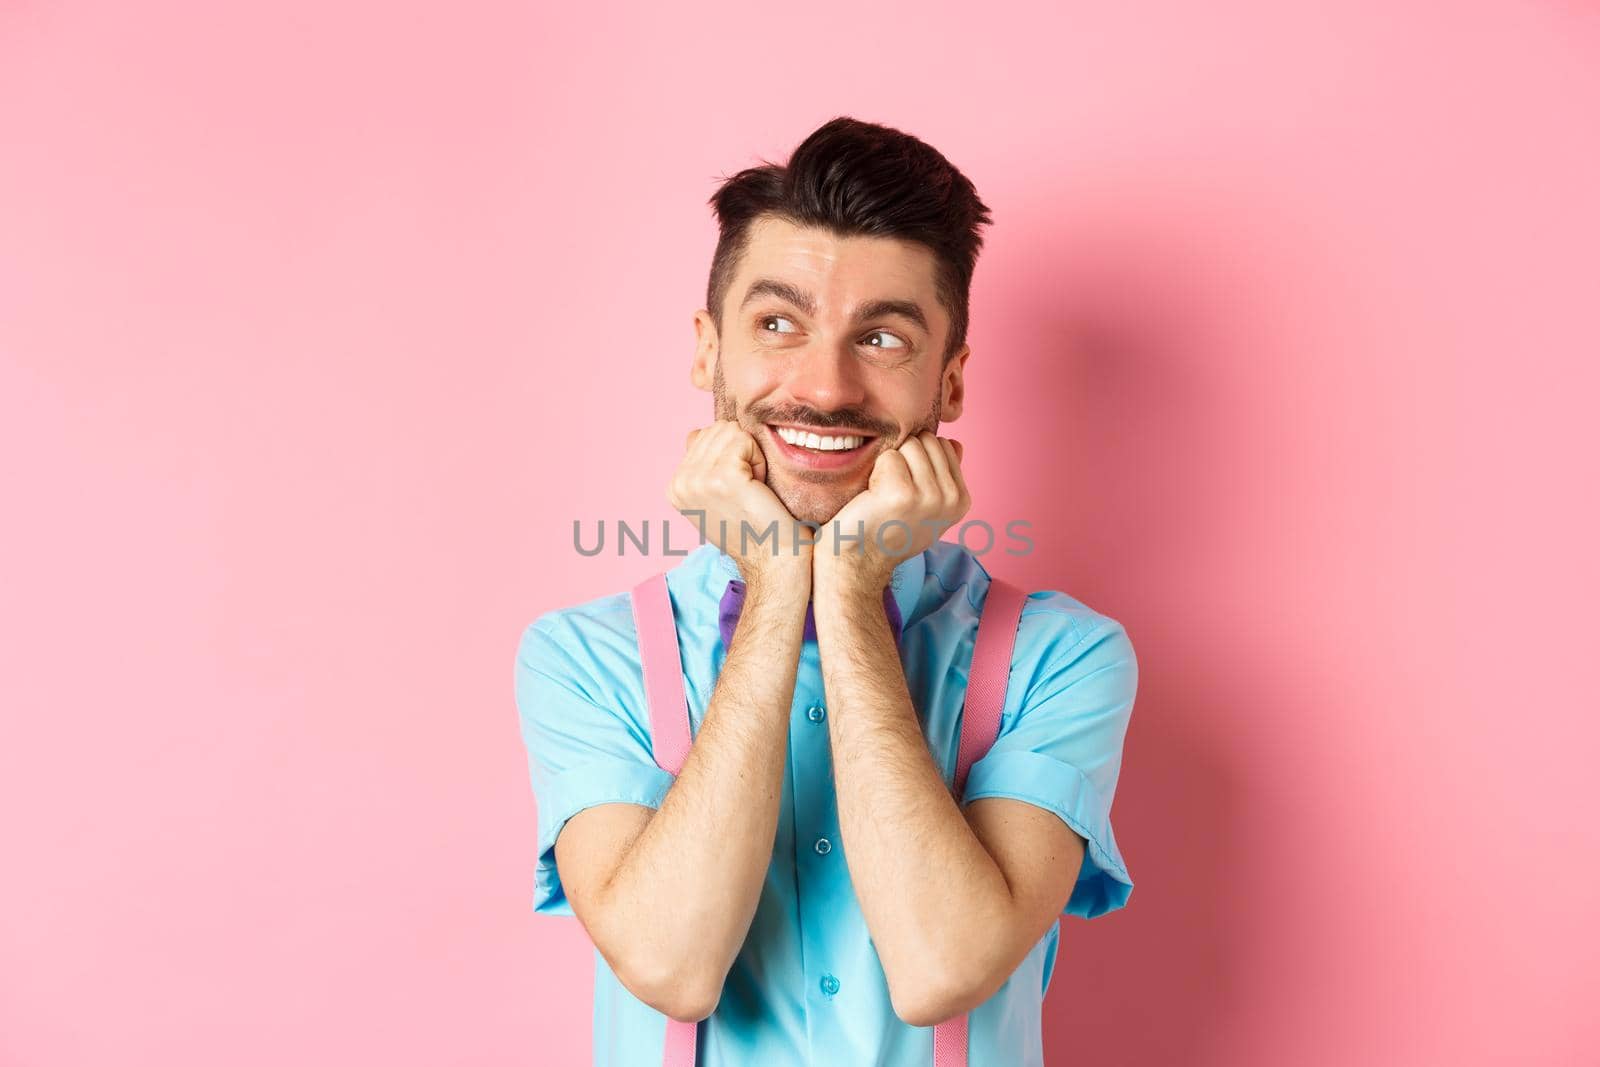 Attractive smiling guy dreaming of something, looking at upper left corner imaging things, daydreaming on pink background. Copy space